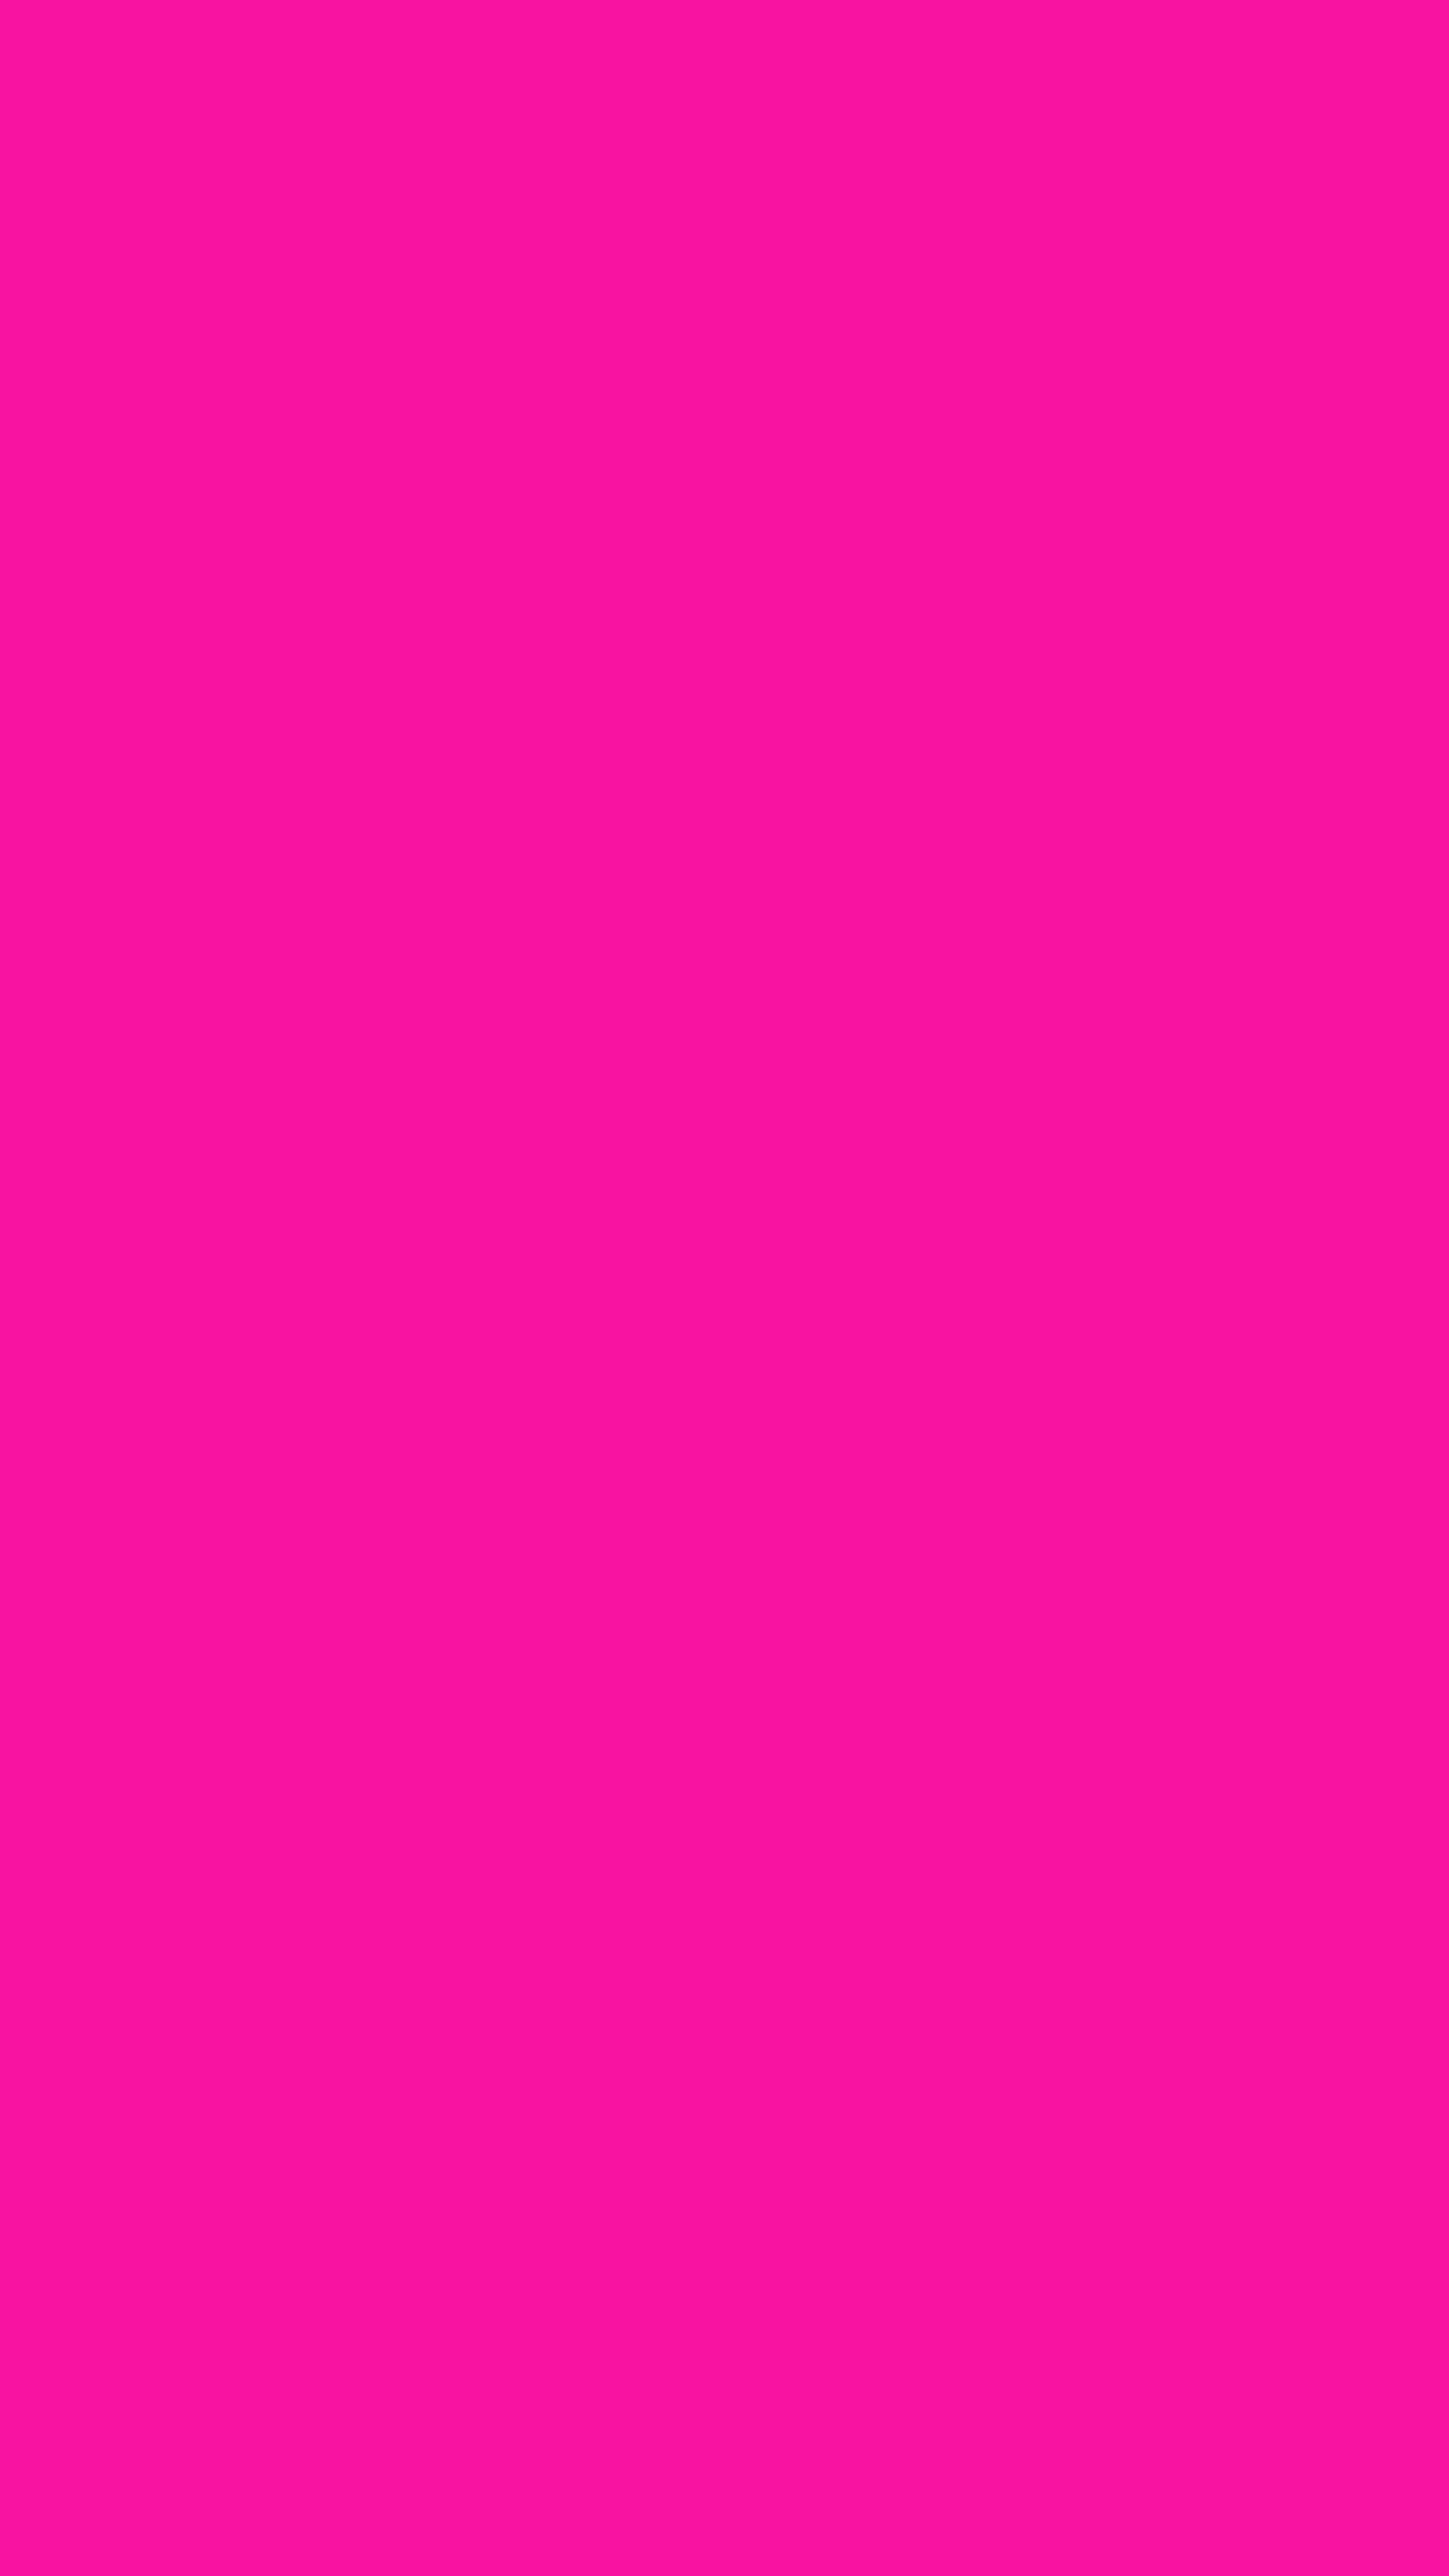 Download wallpaper 3240x5760 pink, color, background, texture hd background